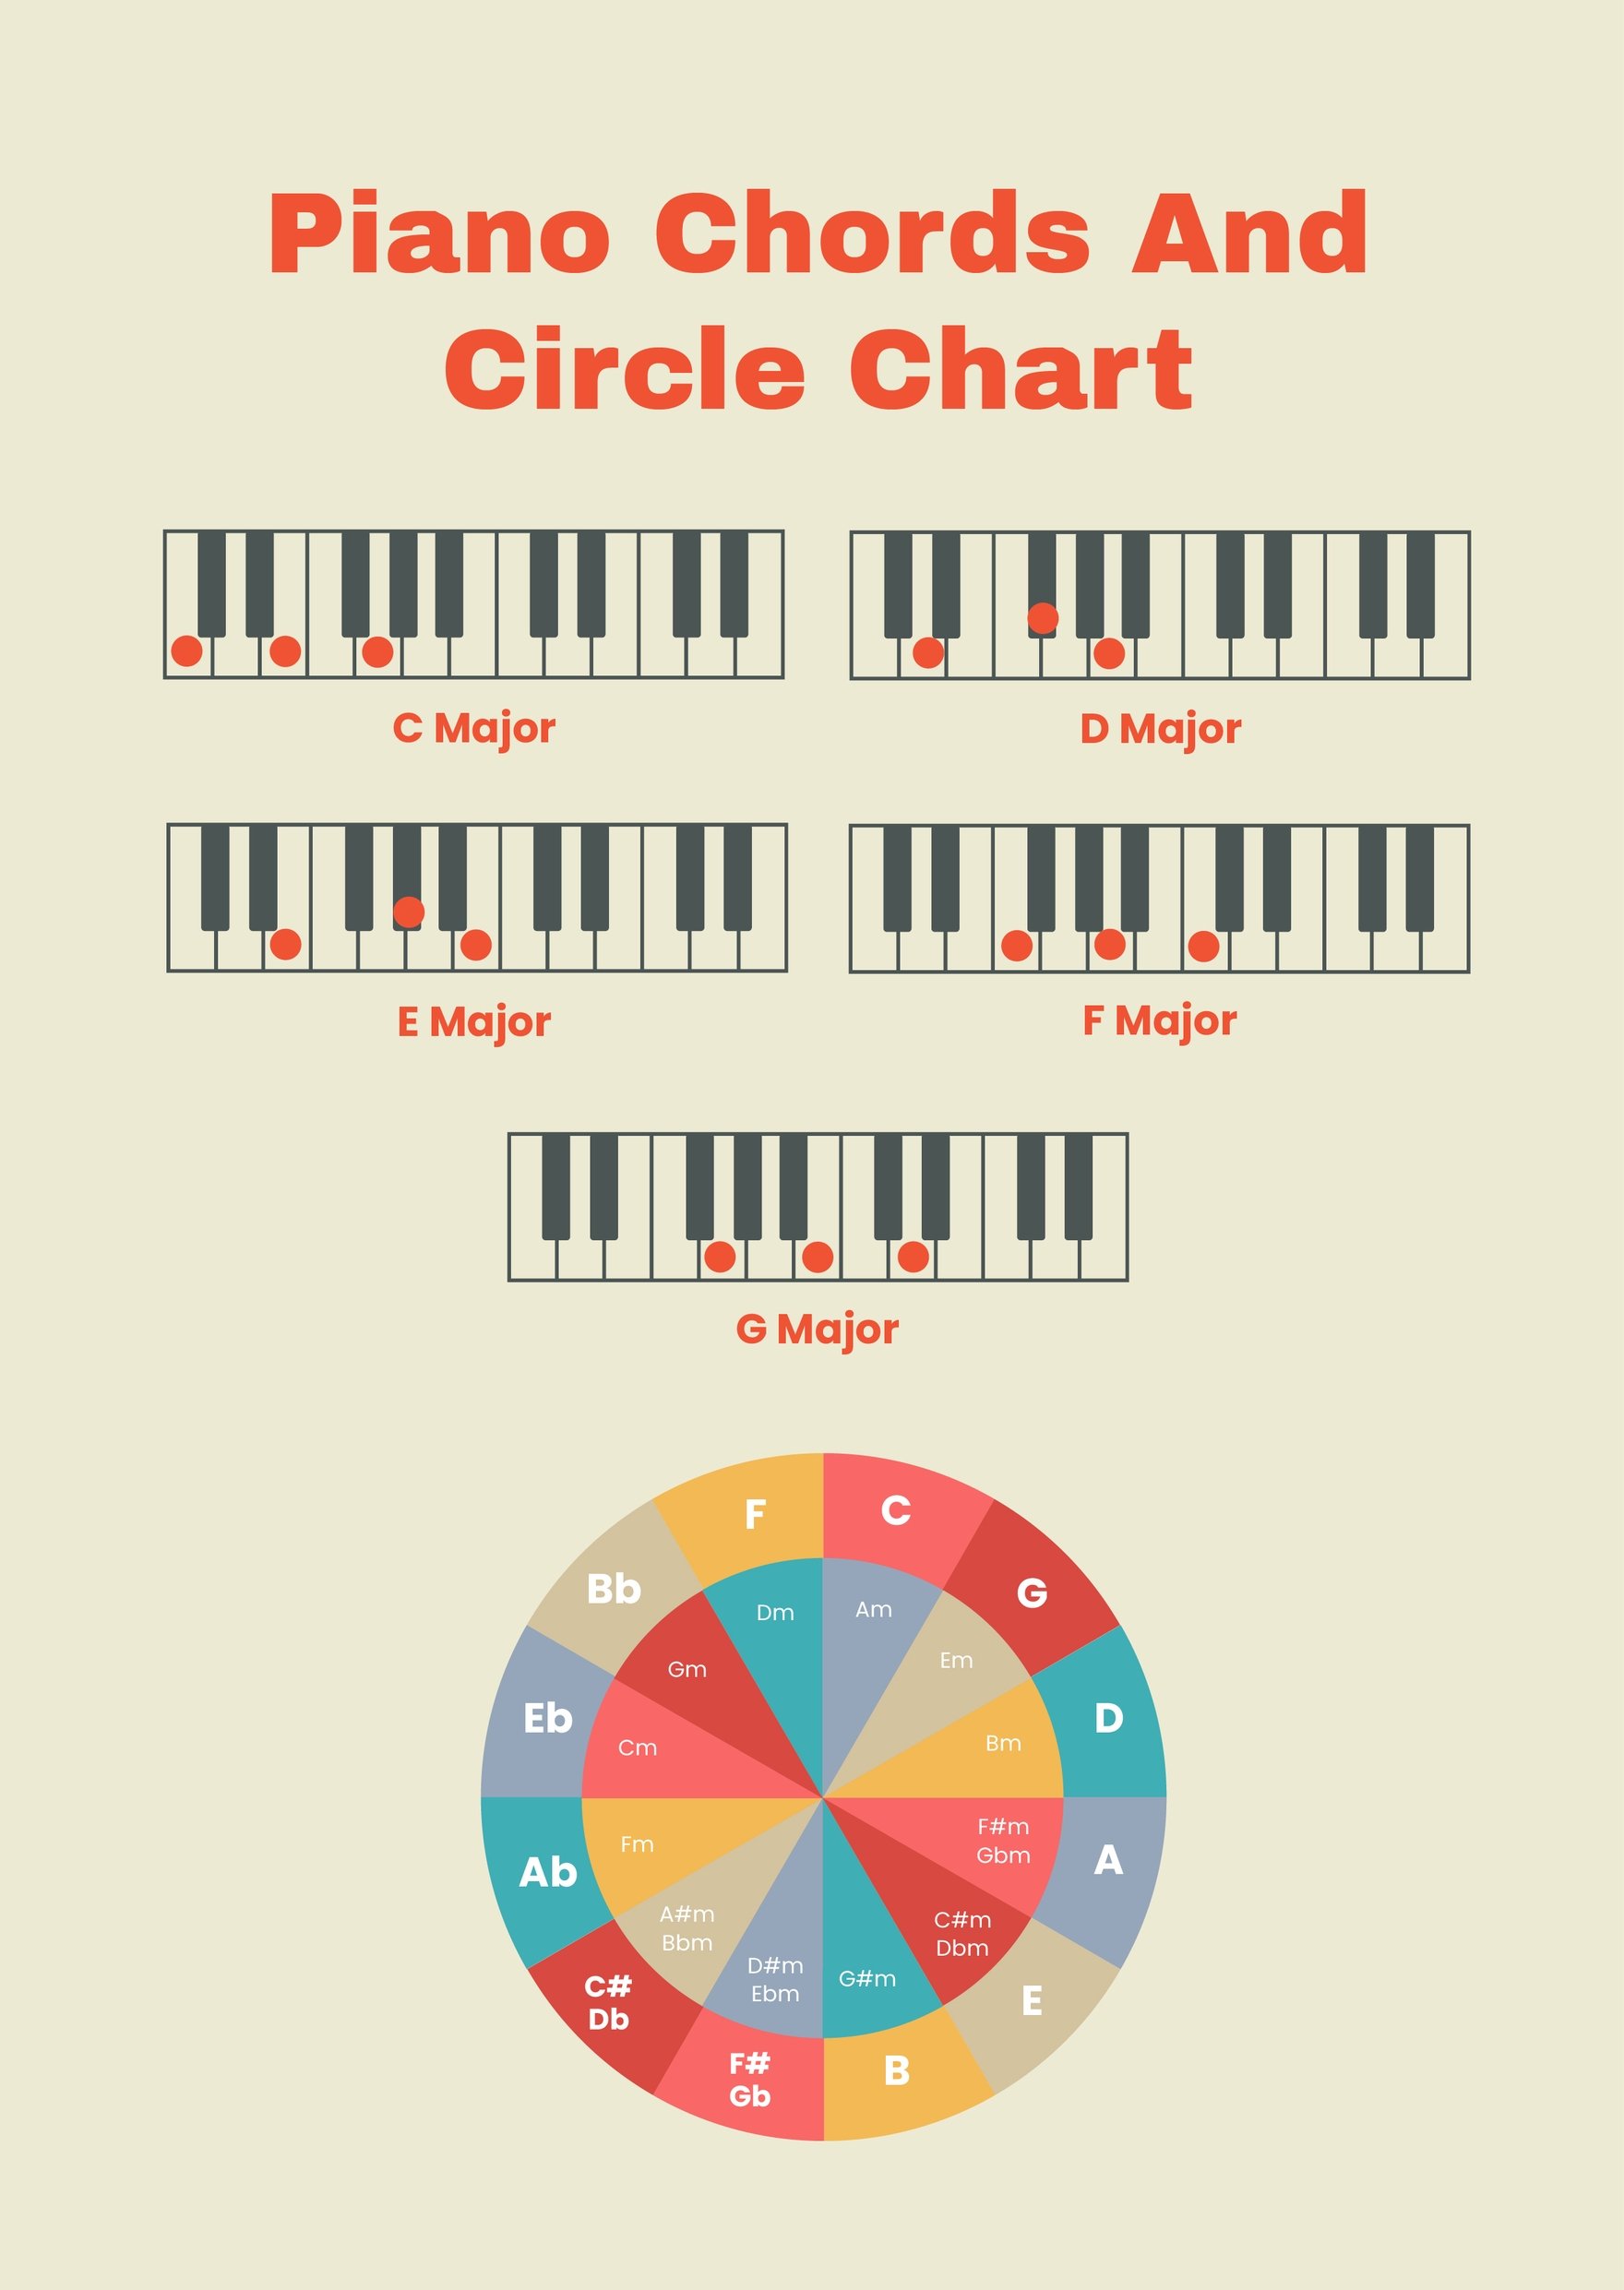 Piano Chords And Circle Chart in PDF, Illustrator